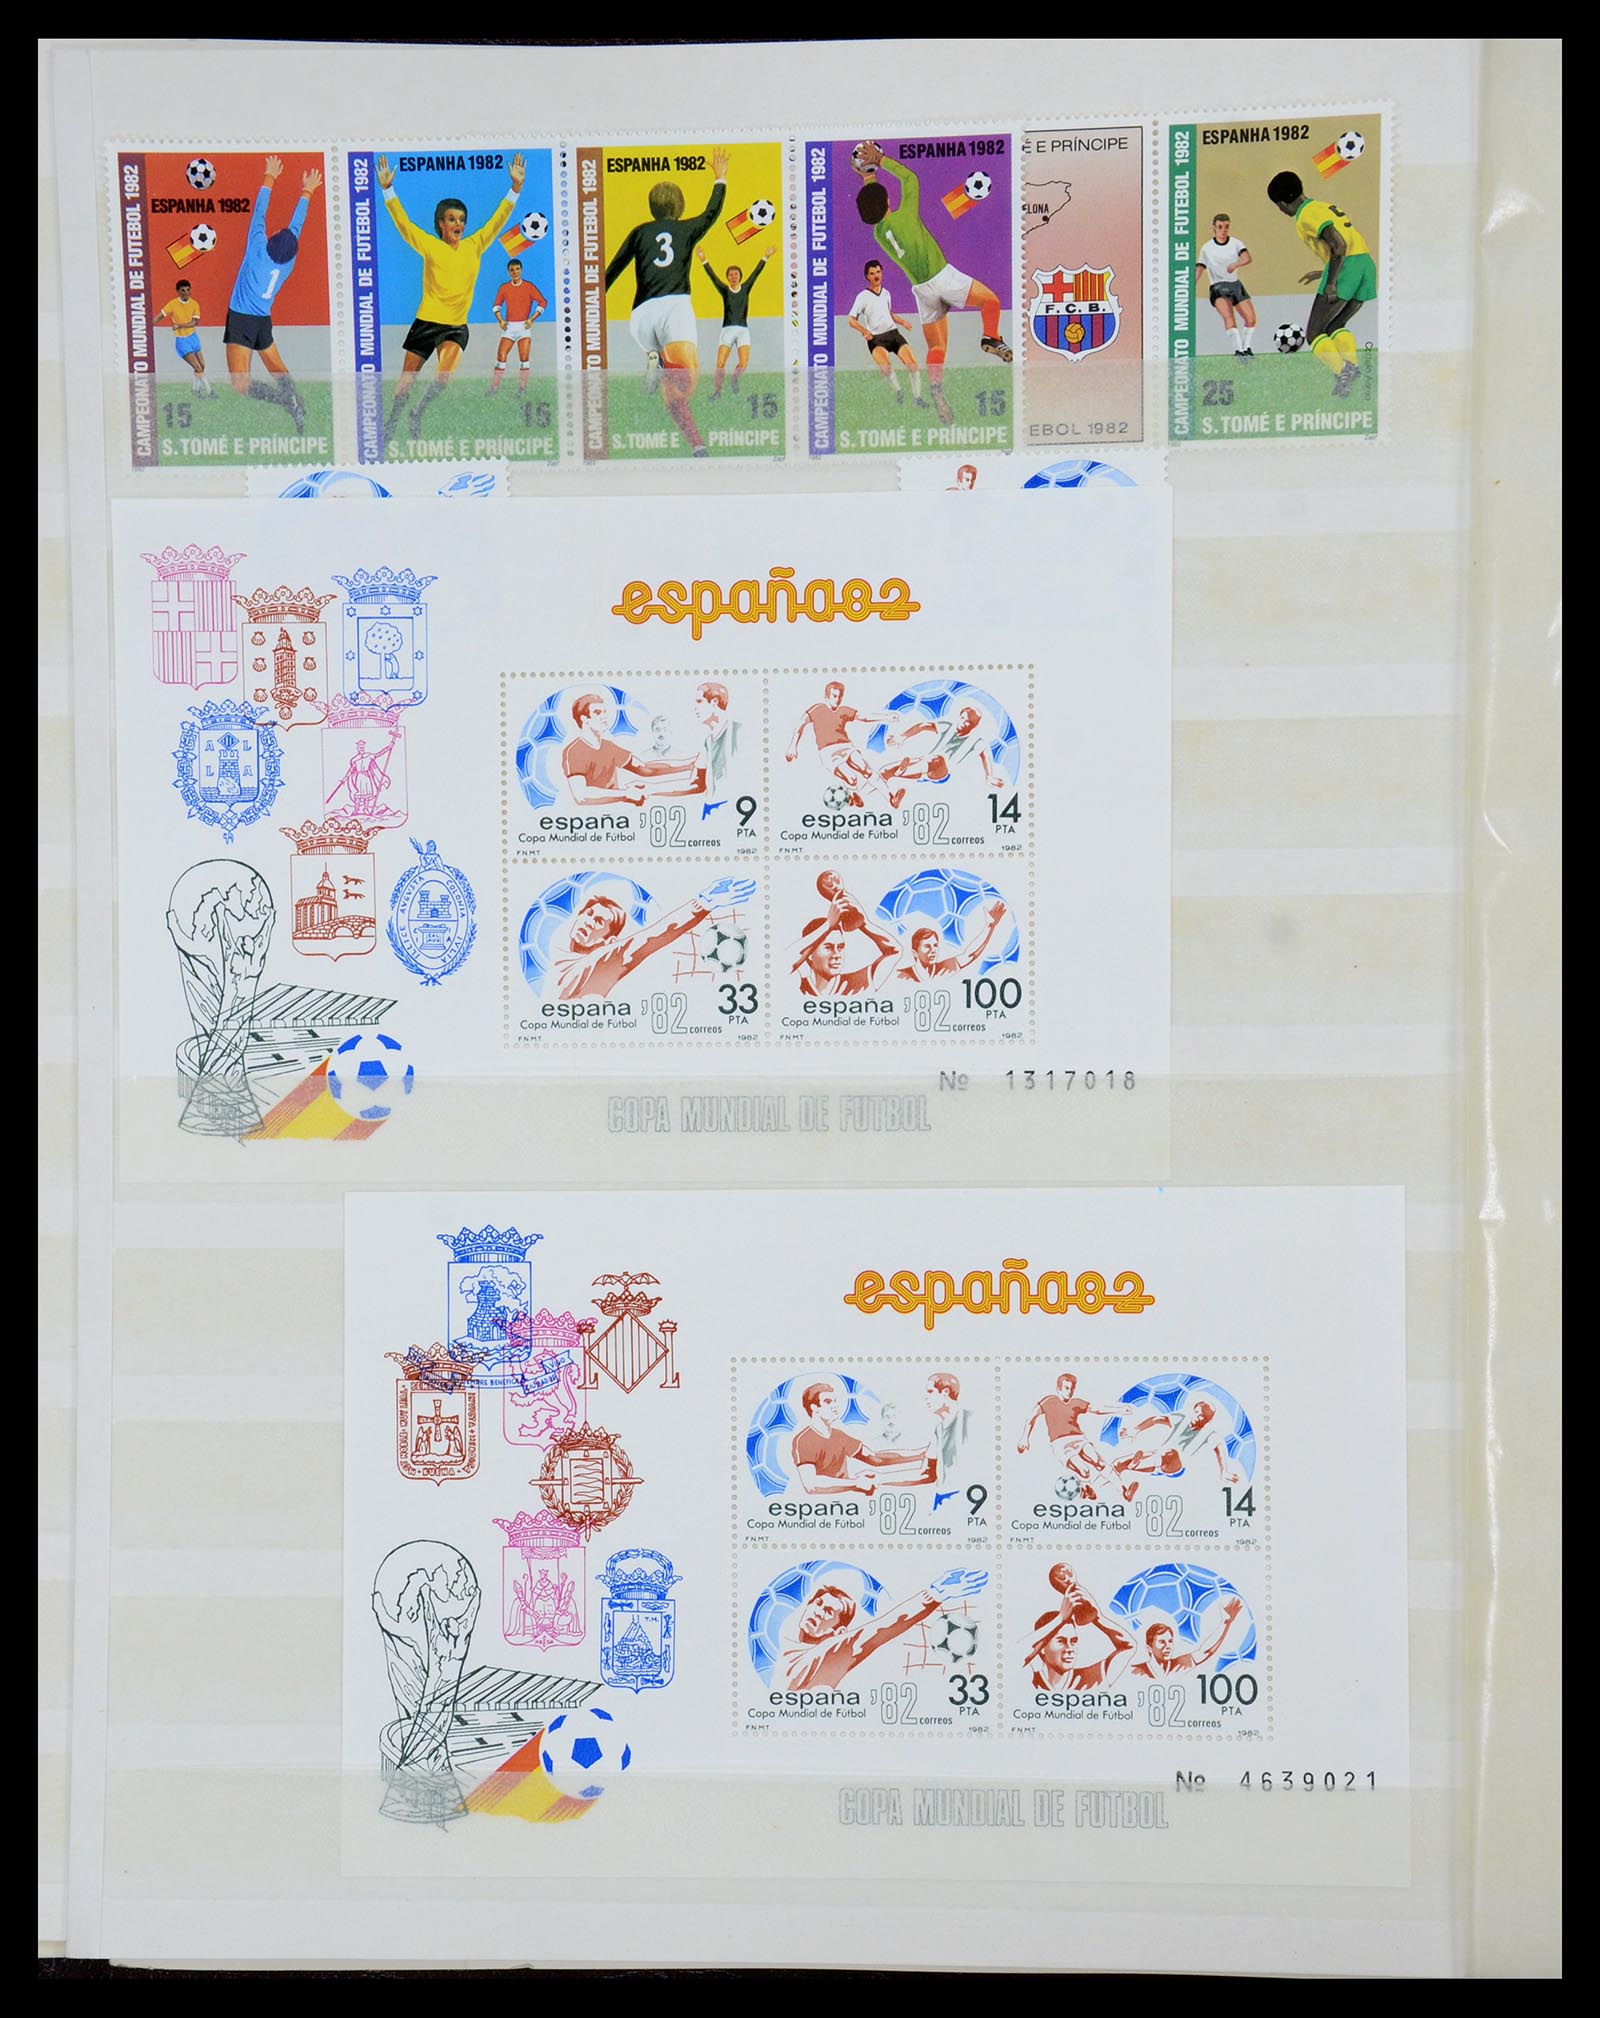 35878 014 - Stamp Collection 35878 1982 and 1986 FIFA World Cup.